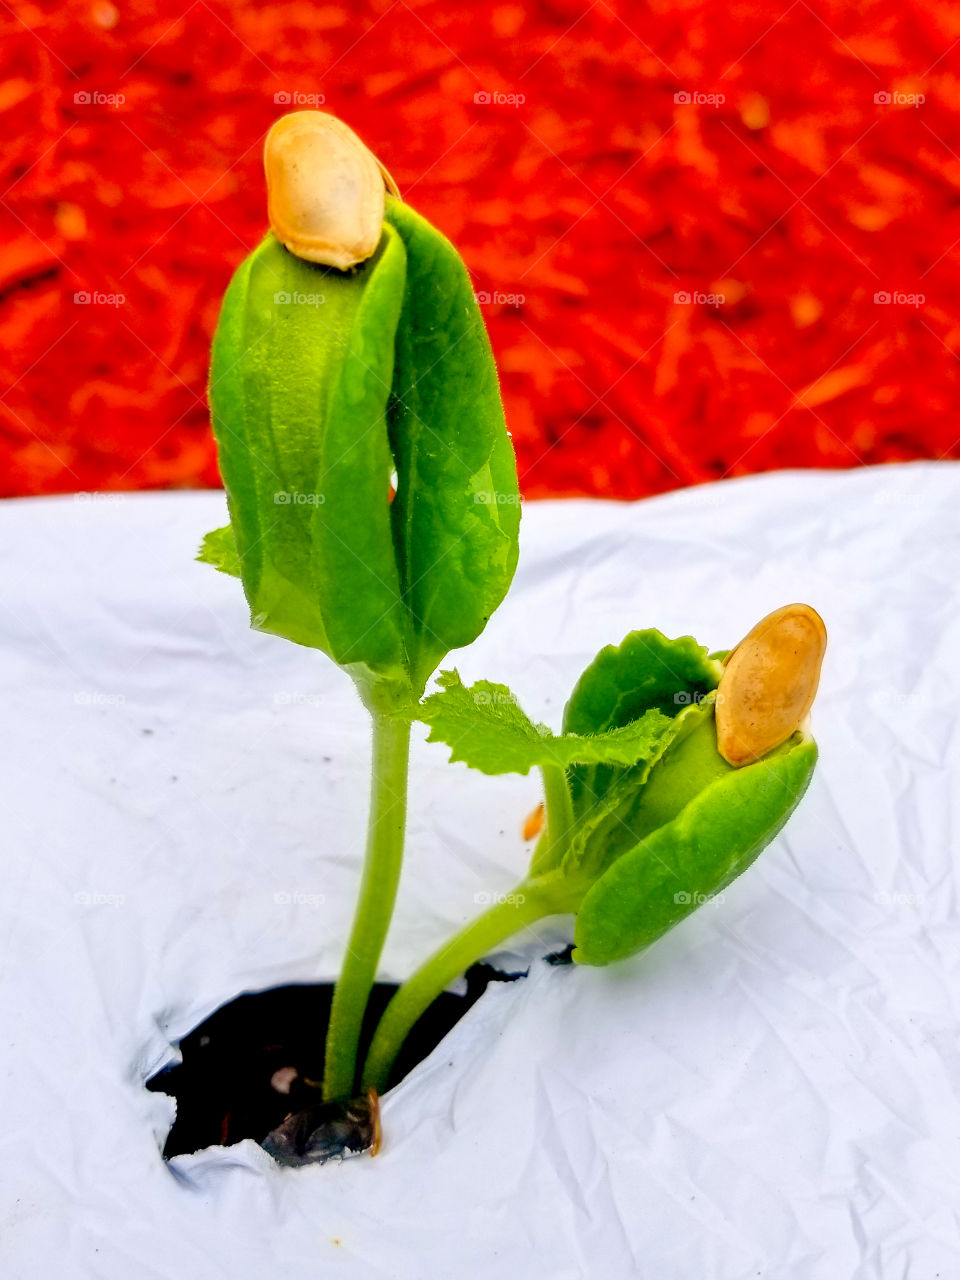 Squash sprouting from seed